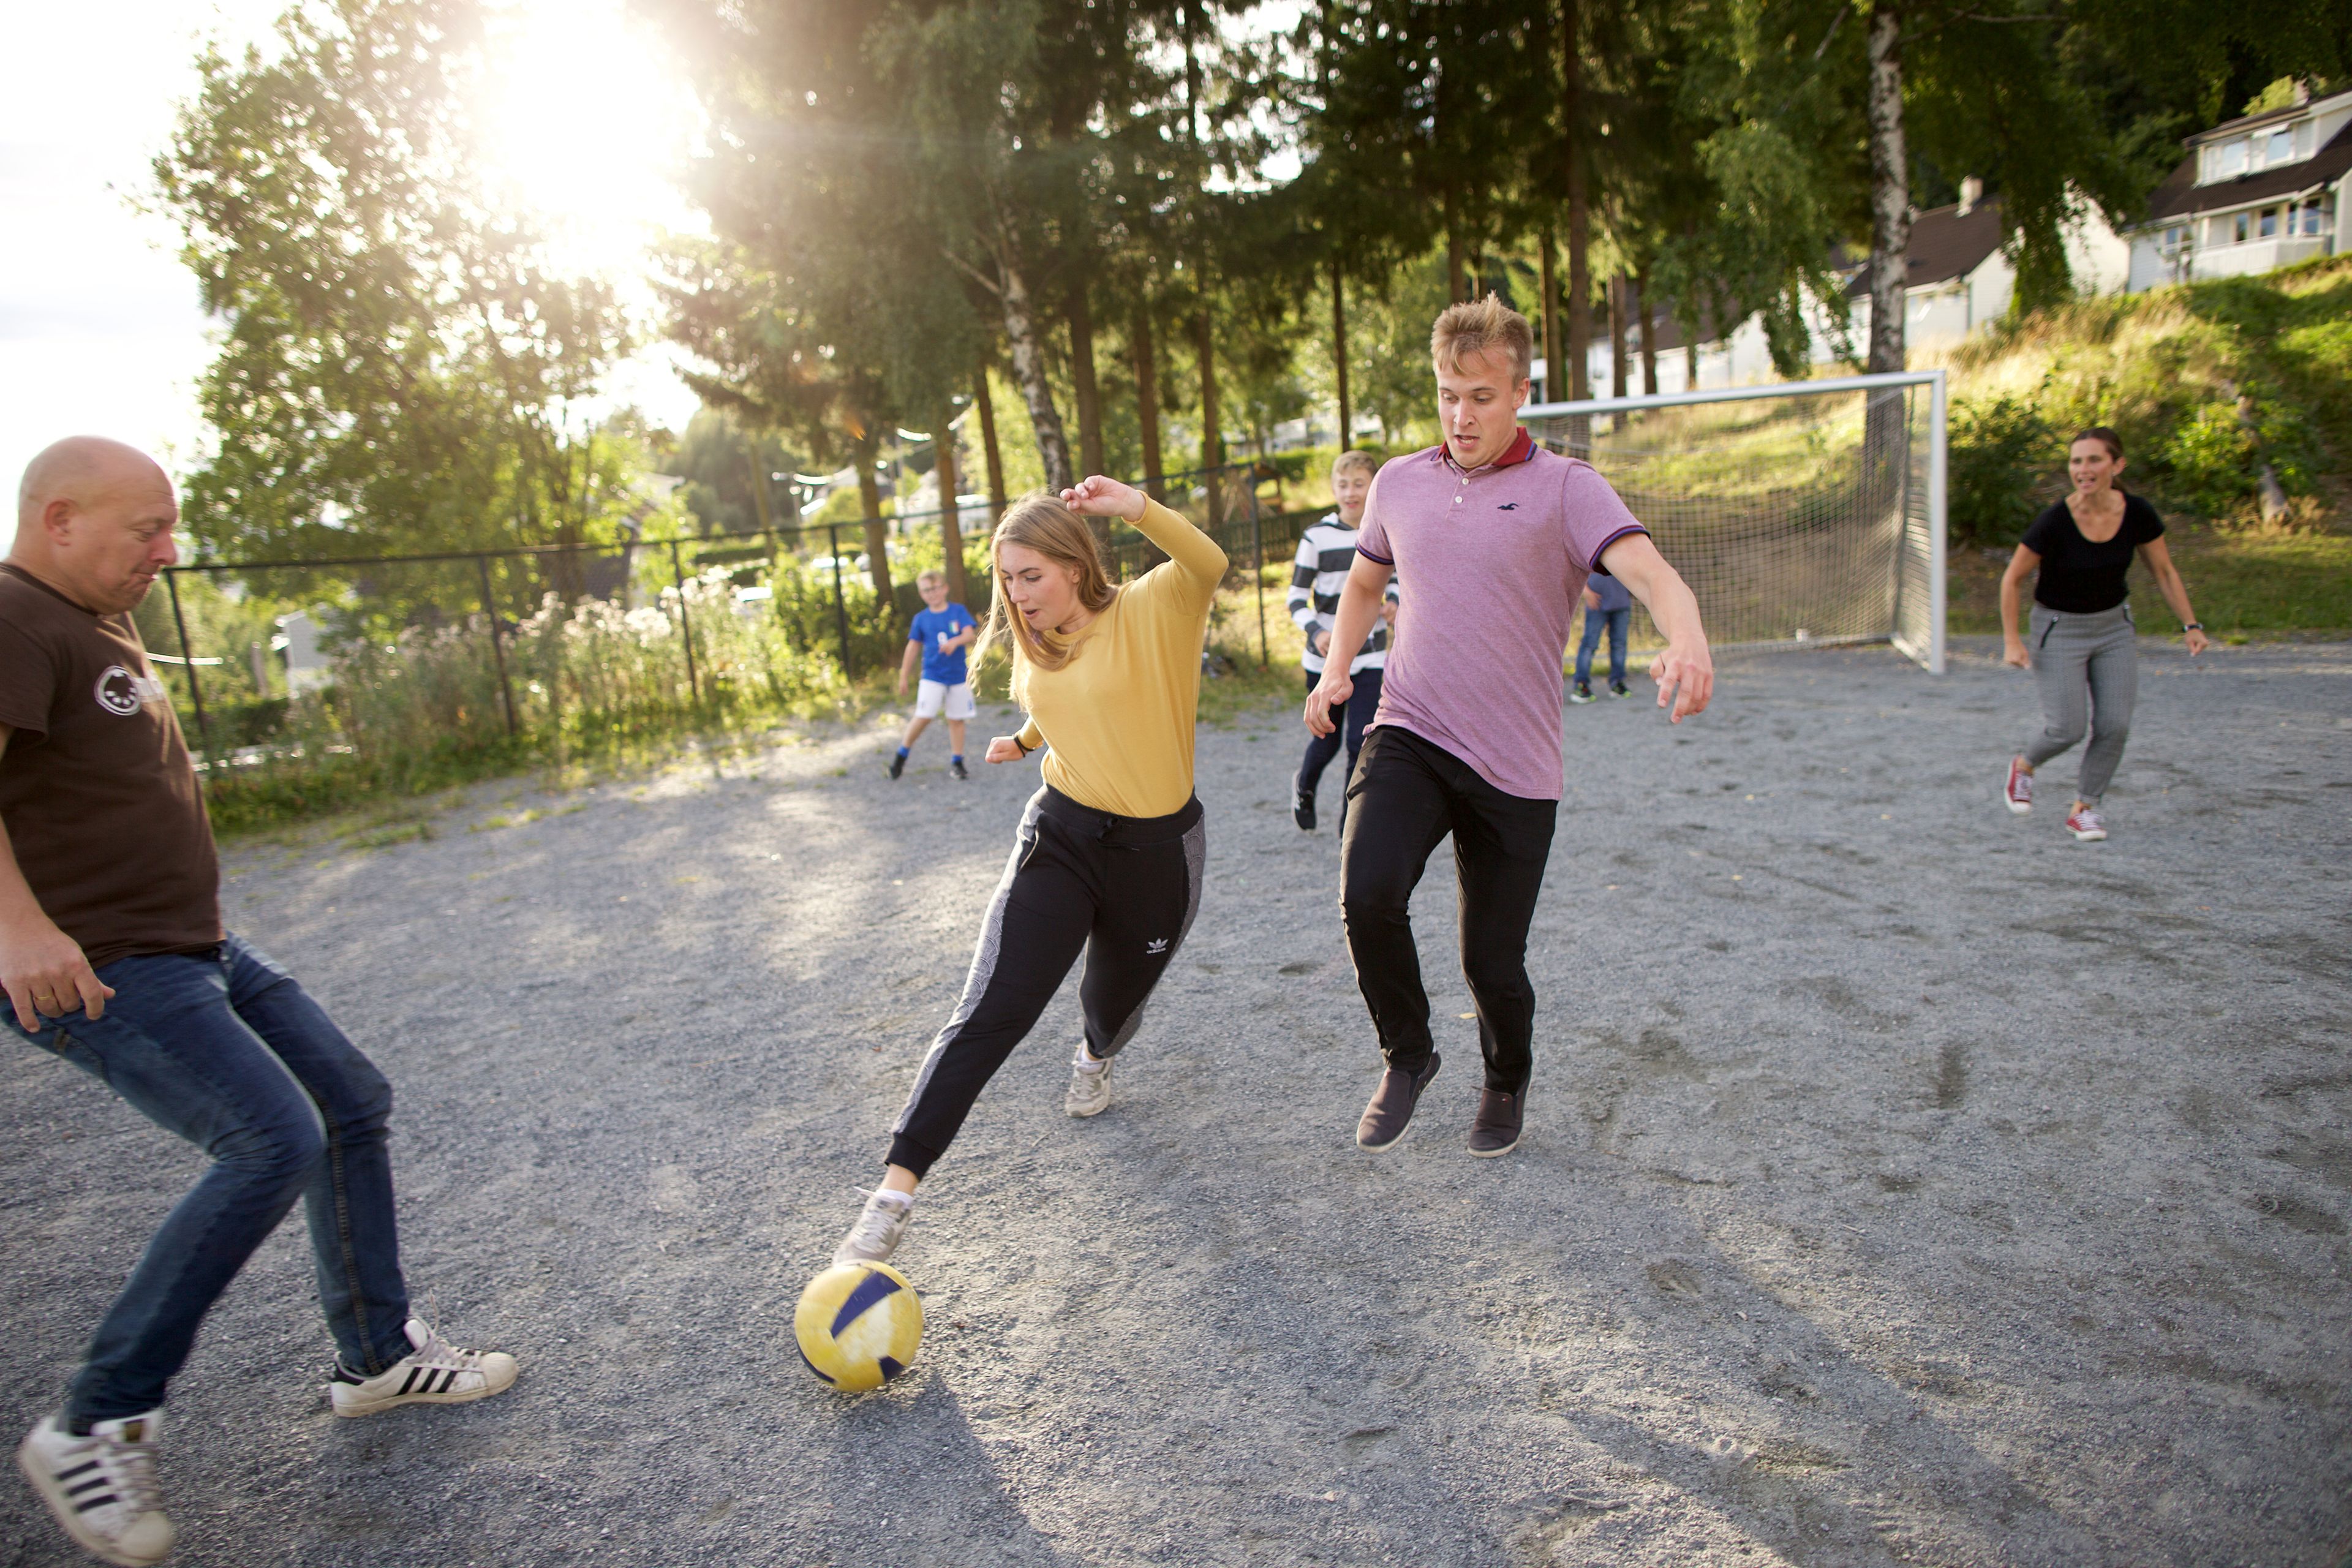 A family in Norway plays soccer together outside their home in the backyard.